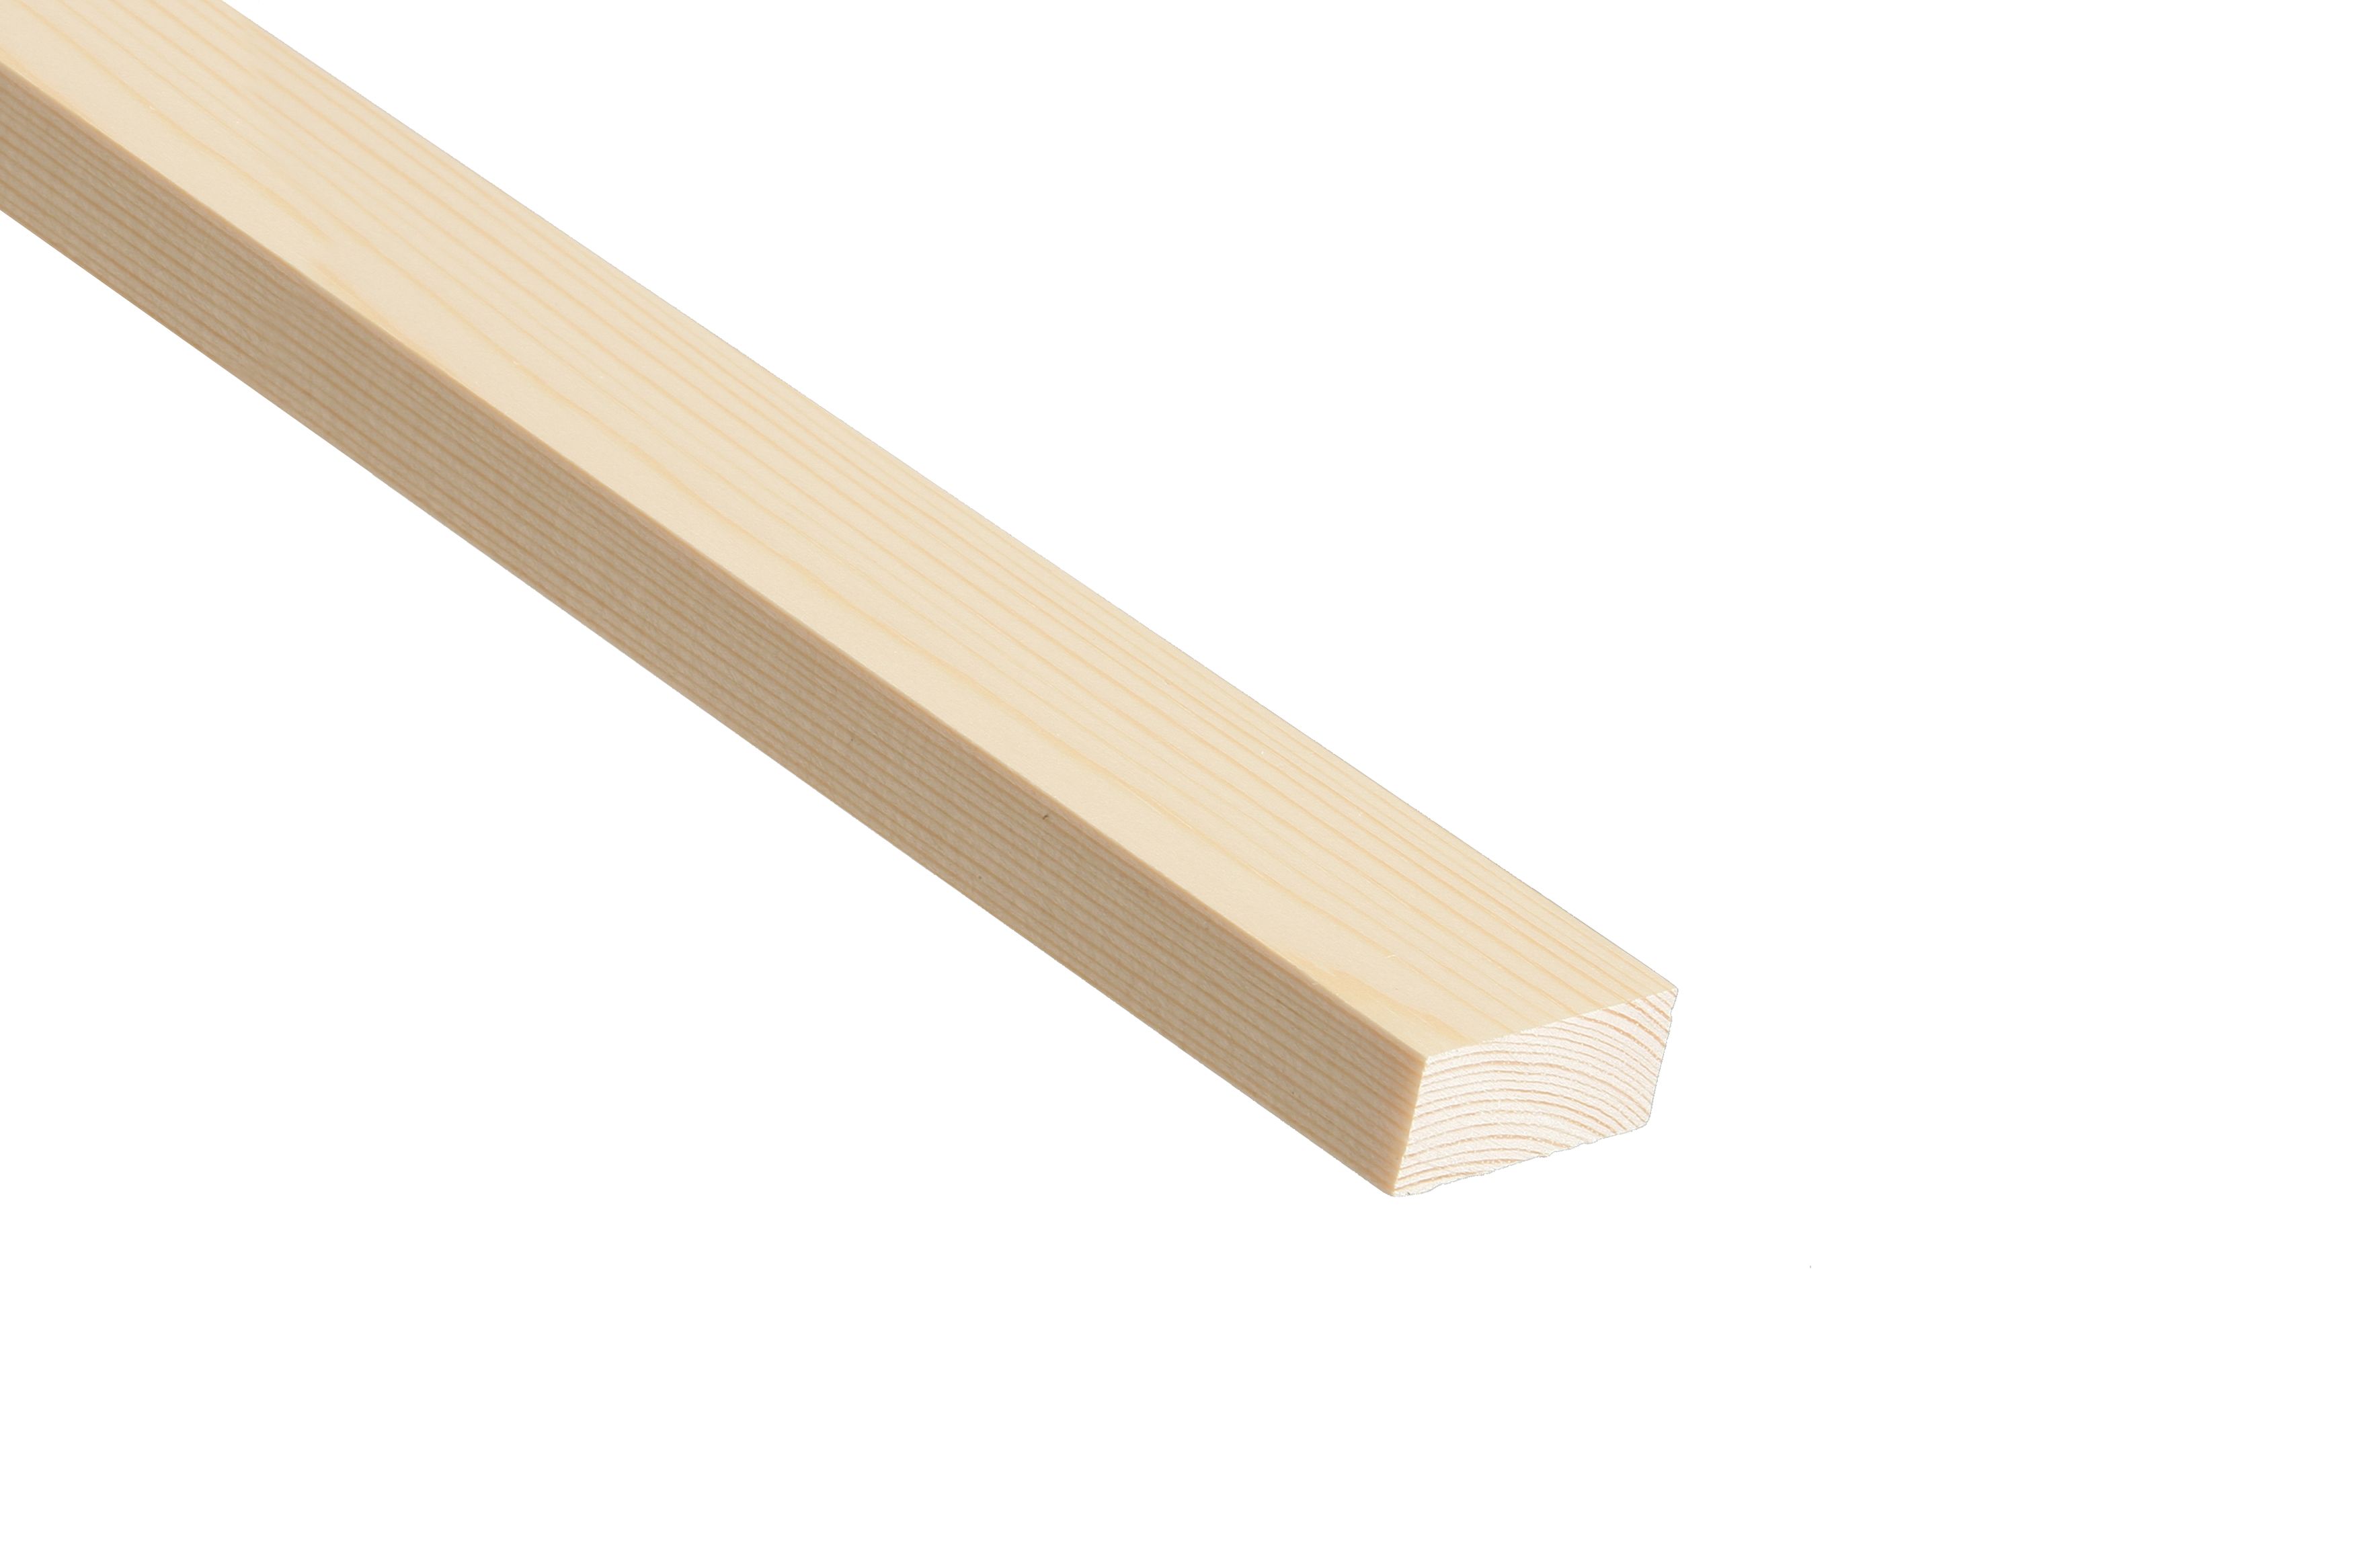 Image of Wickes Pine Stripwood Moulding (PSE) - 10 x 68 x 2400mm